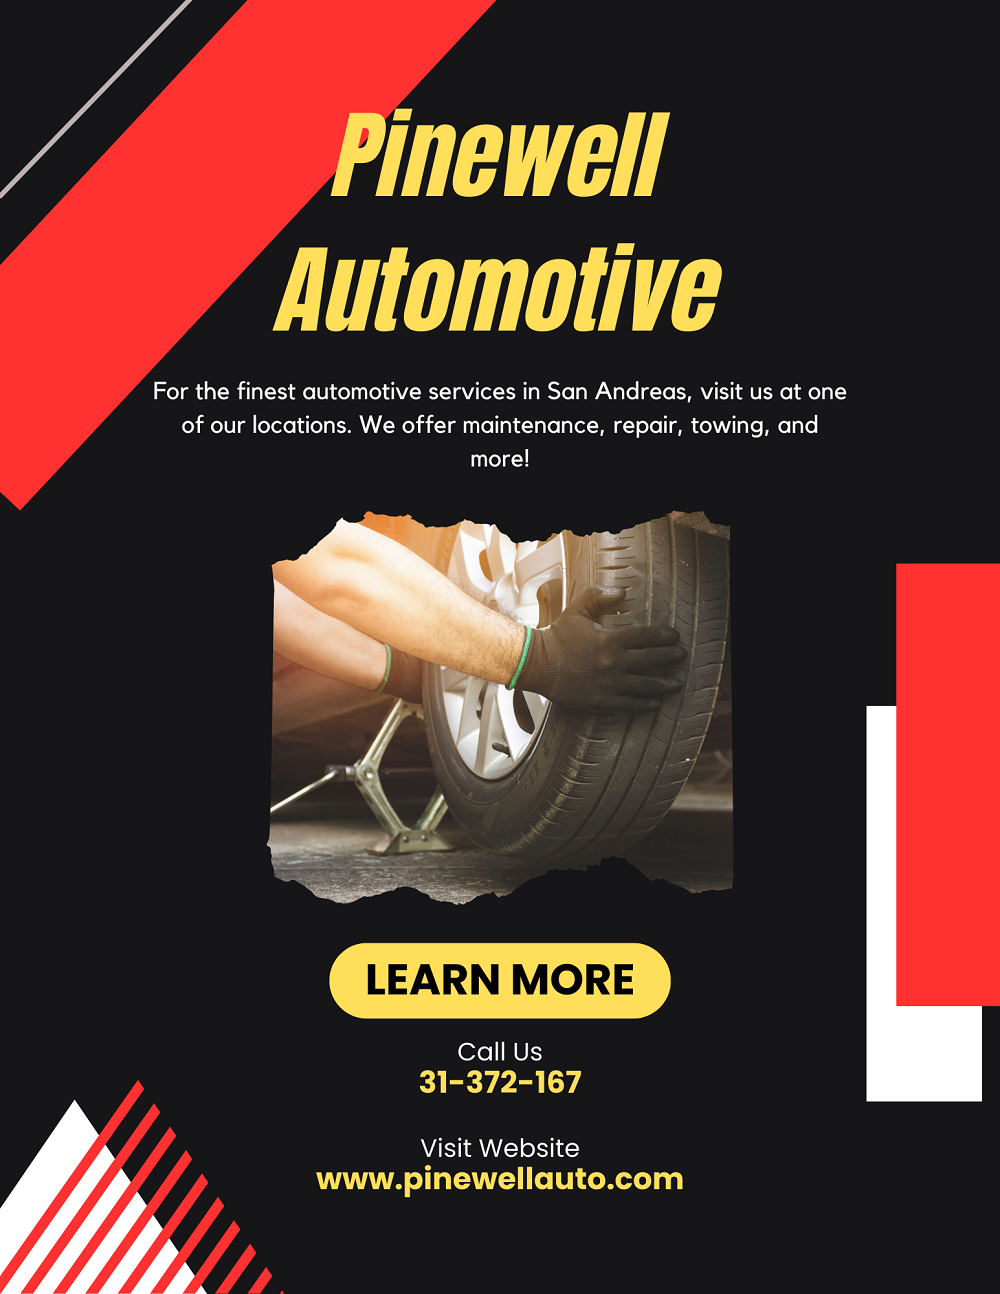 Pinewell_Automotive_Flyer.png